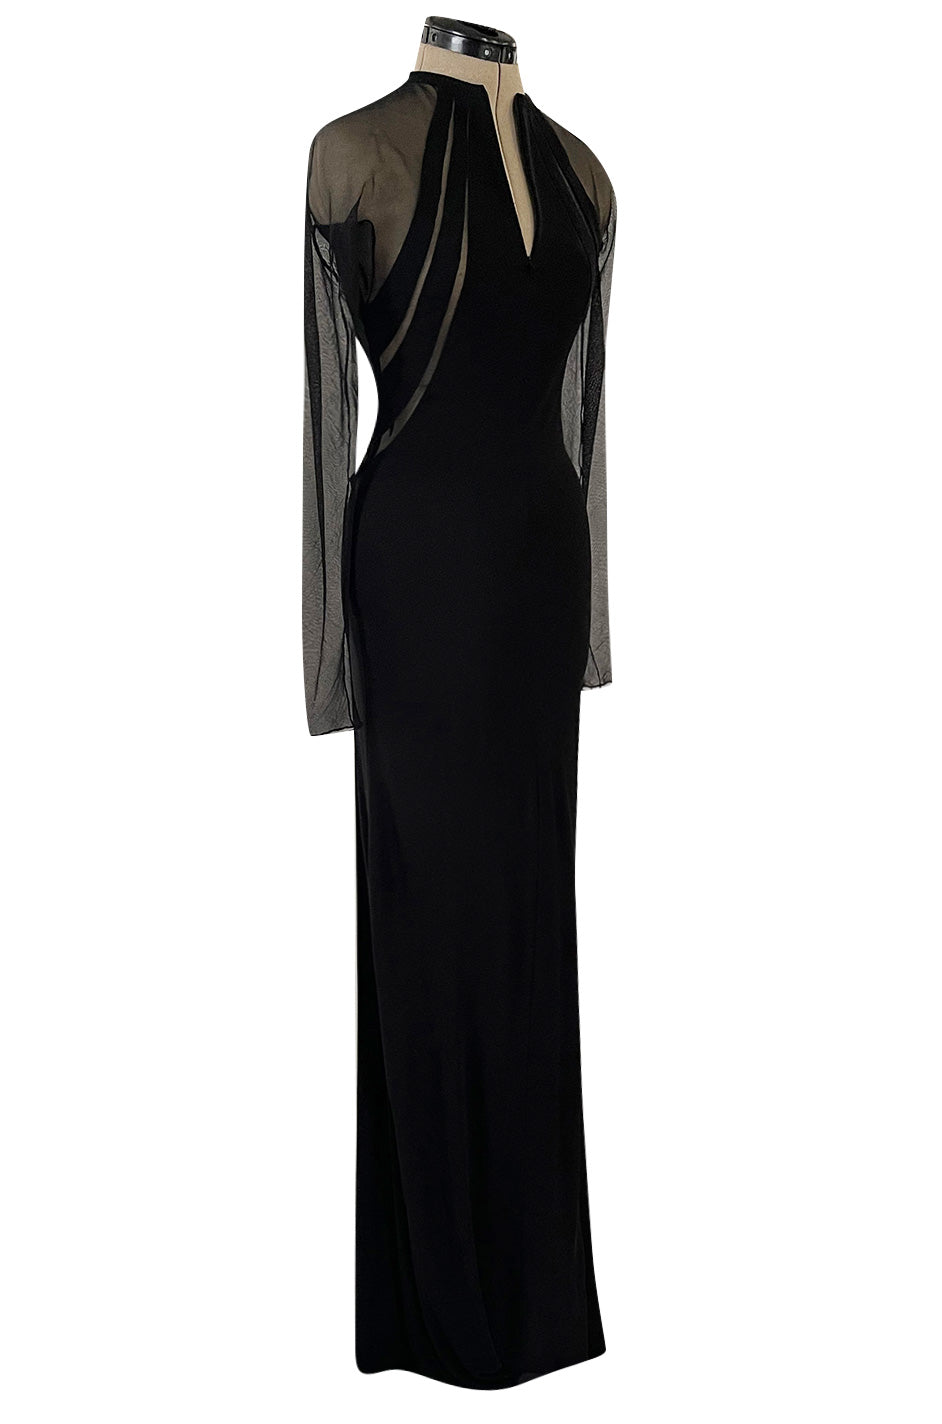 Spectacular 2005 John Anthony Couture Black Stretch Jersey Dress w Cur ...